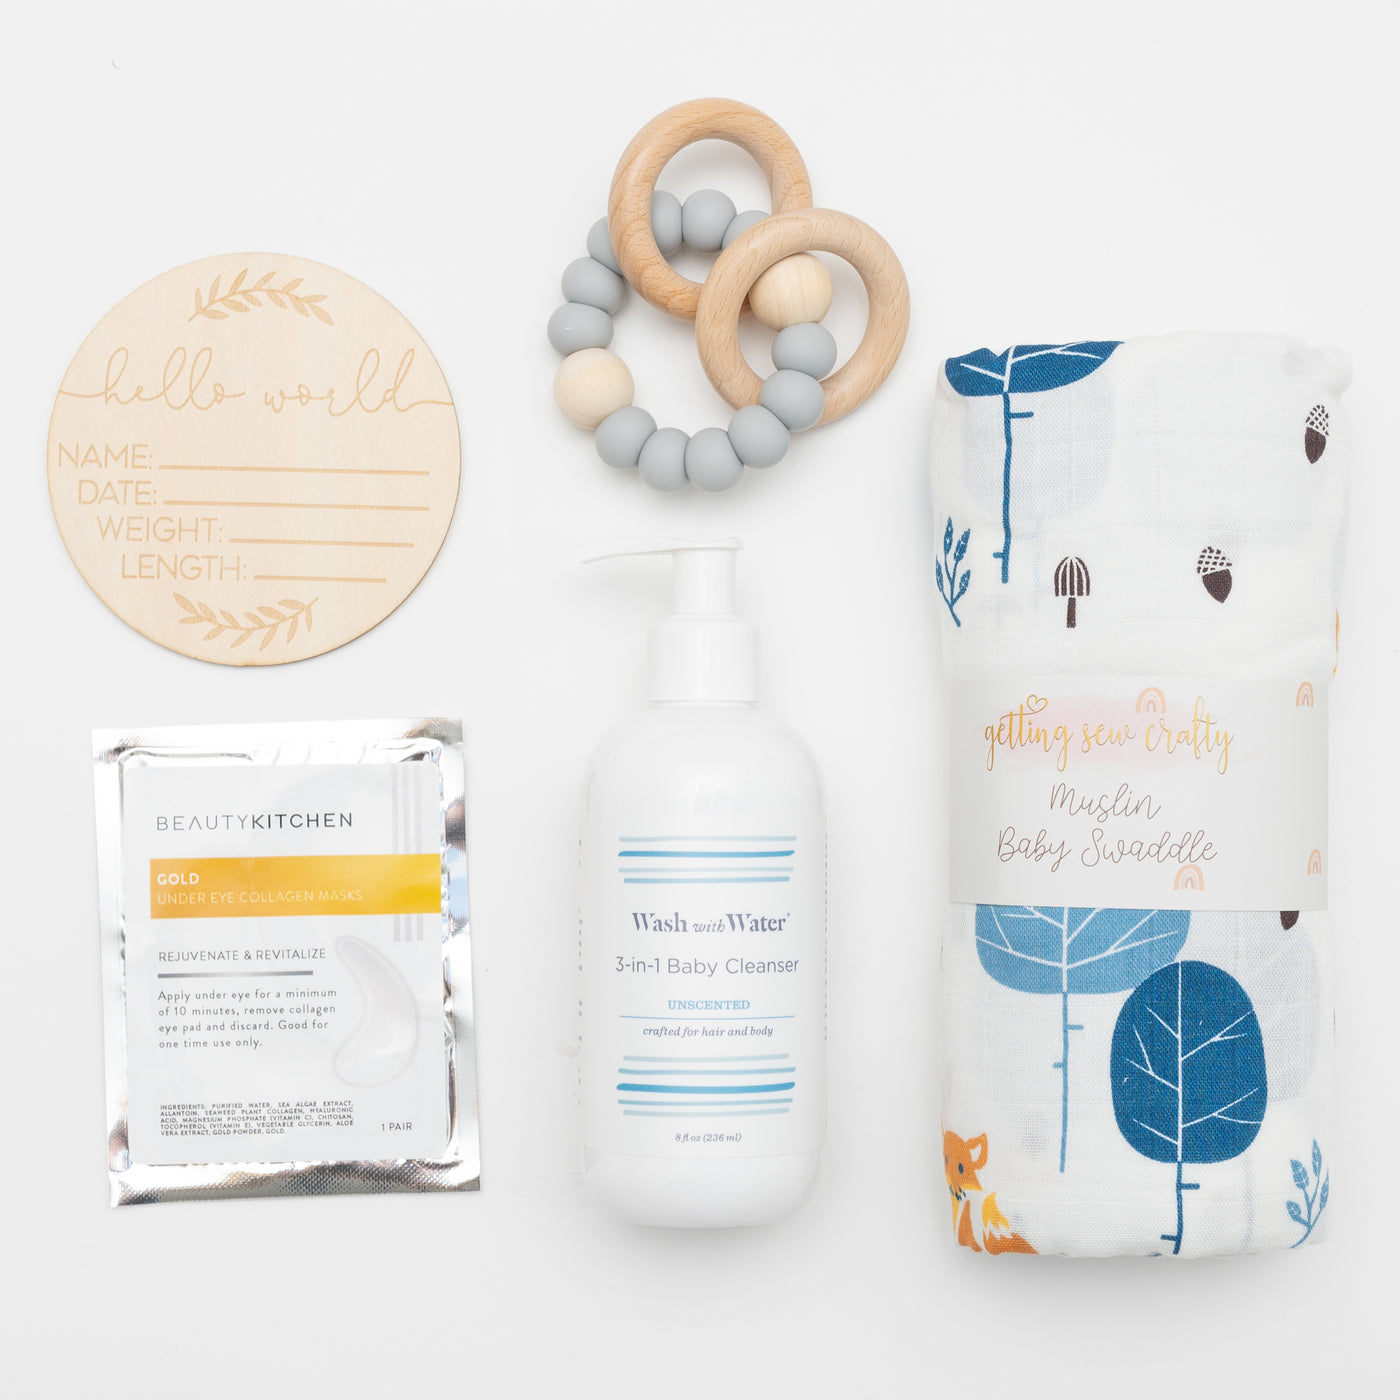 Celebrate the milestone of a new baby (and mom!) in your life with this thoughtful and elegant gift box. Items: Swaddle Blanket, Teething ring, Fragrance Free Baby Cleanser, Eye Gels for Mom, Birth Announcement Wood Disc